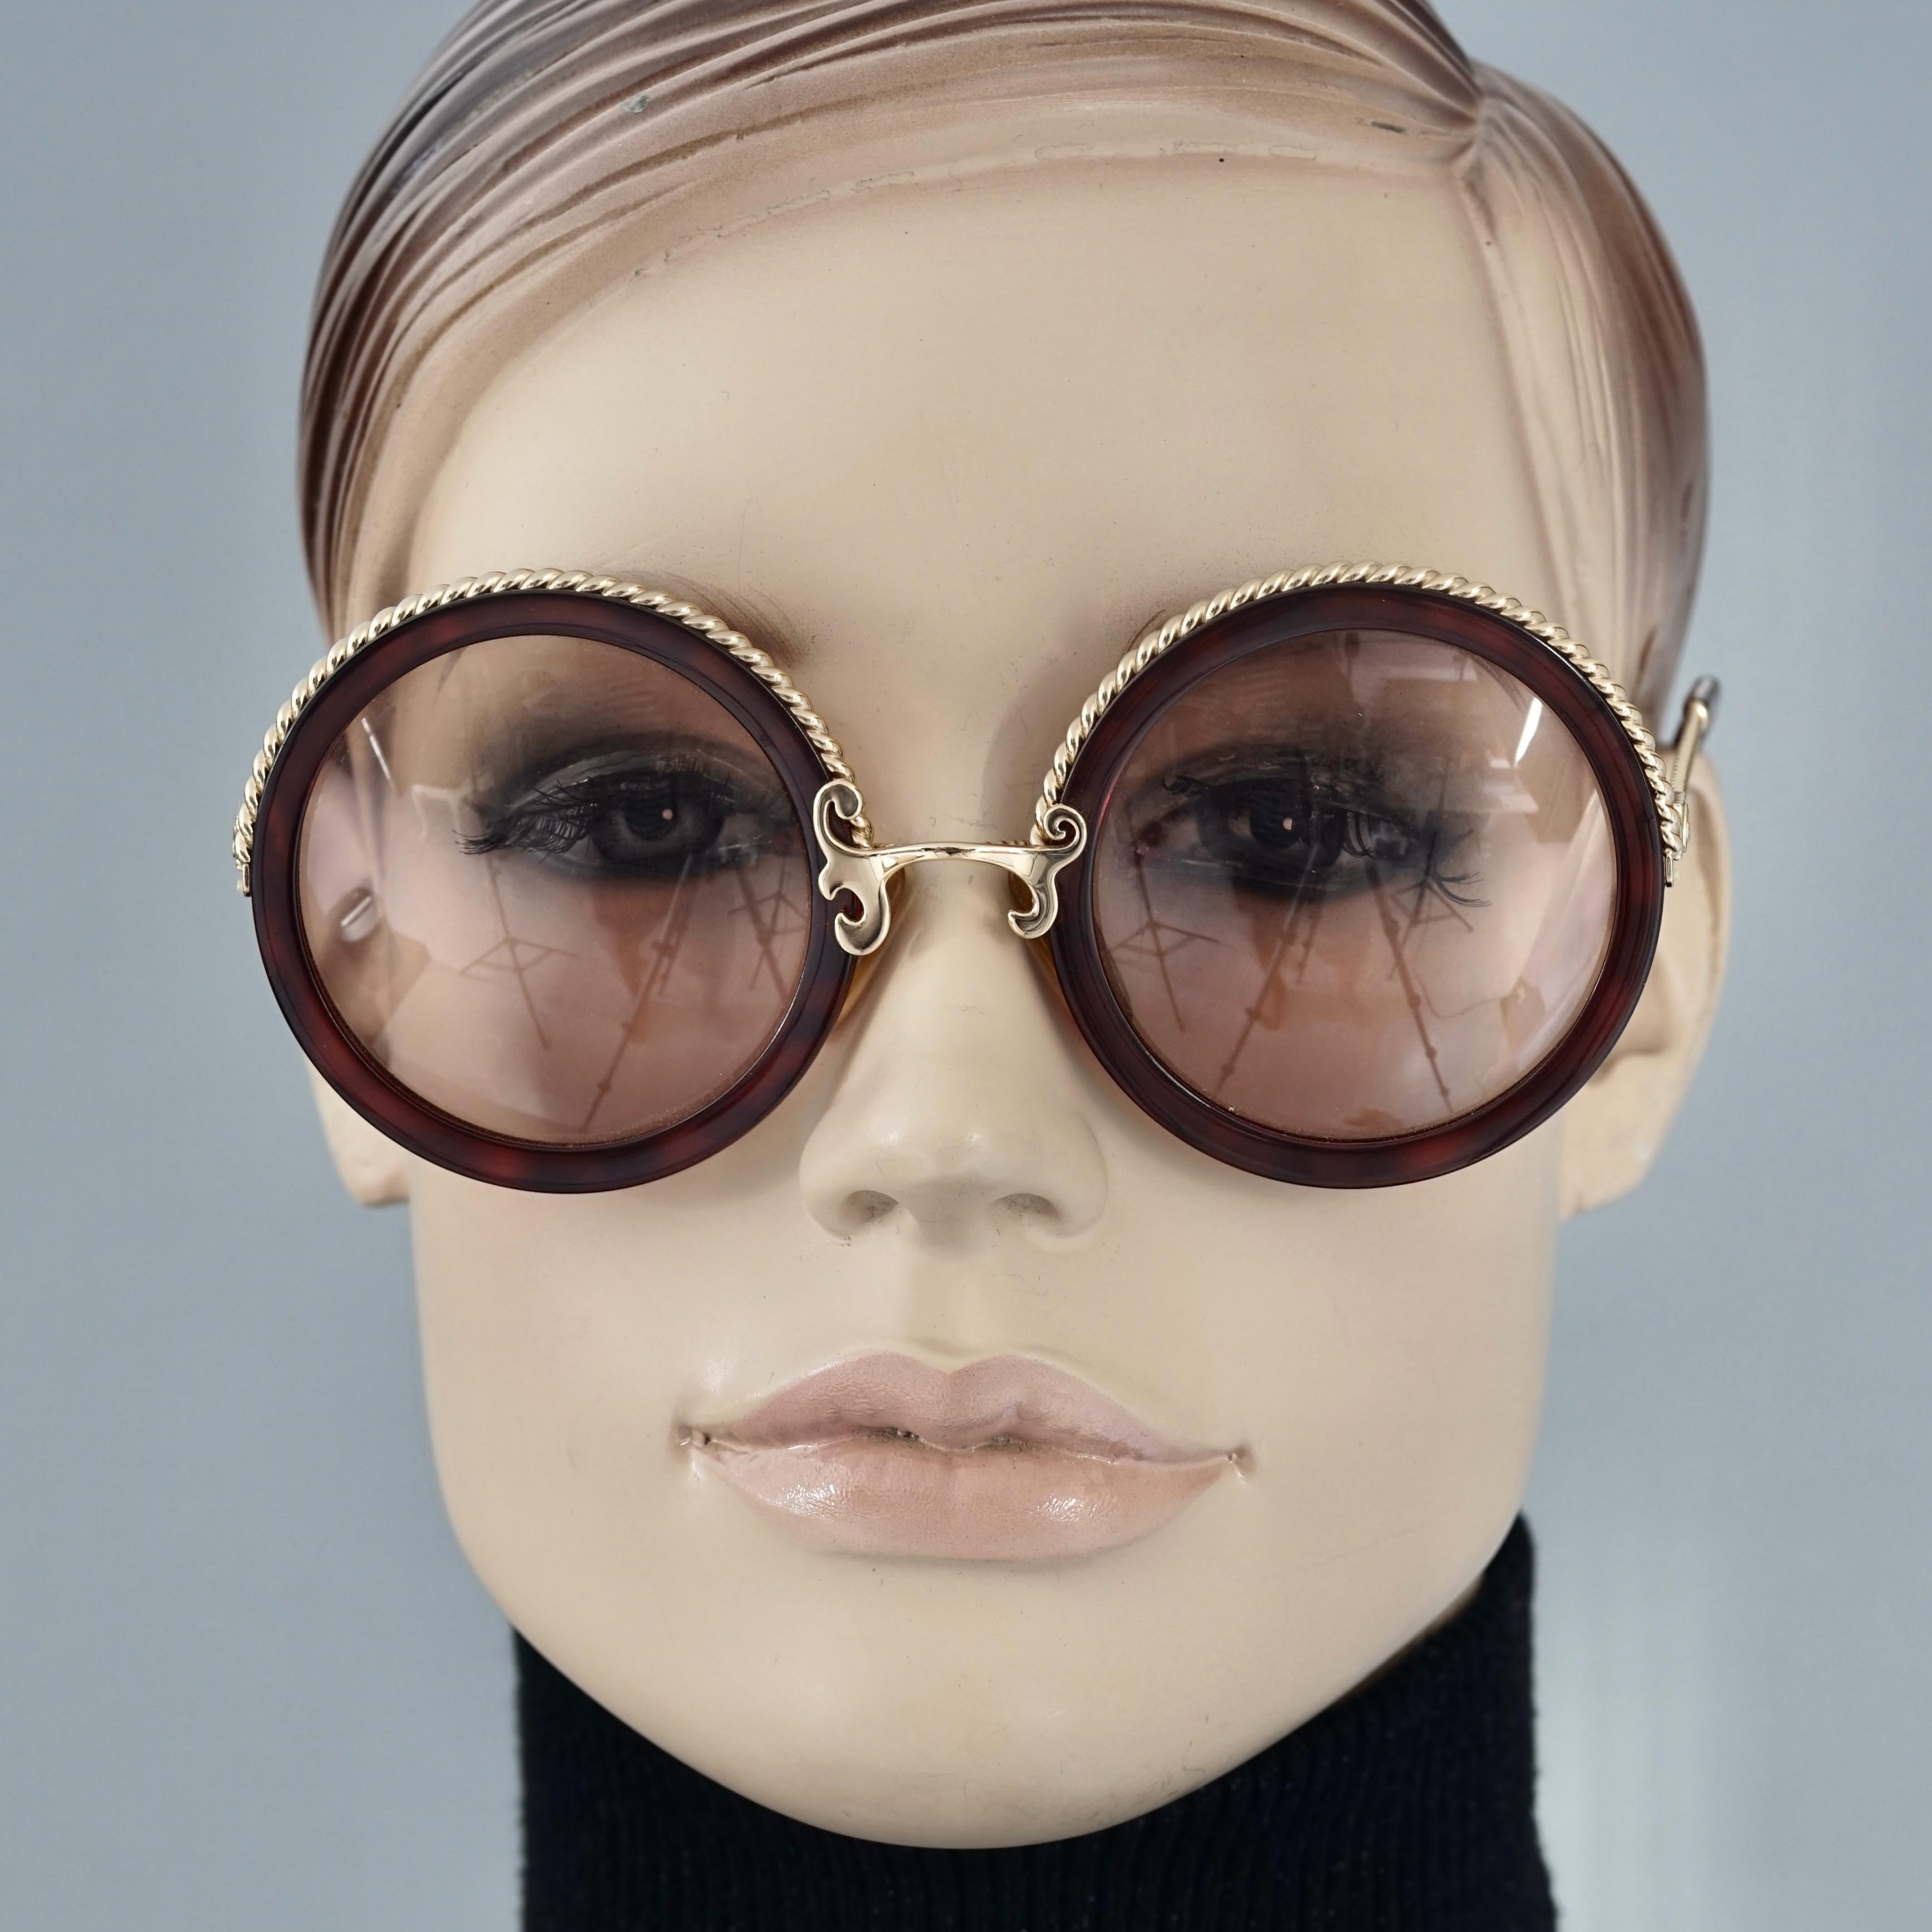 Vintage CHRISTIAN LACROIX Tortoiseshell Round Sunglasses

Measurements:
Height: 2.36 inches (6 cm)
Horizontal Width: 5.39 inches (13.7 cm)
Arms: 4.92 inches (12.5 cm)

Features:
- 100% Authentic Vintage CHRISTIAN LACROIX. 
- Round faux tortoiseshell